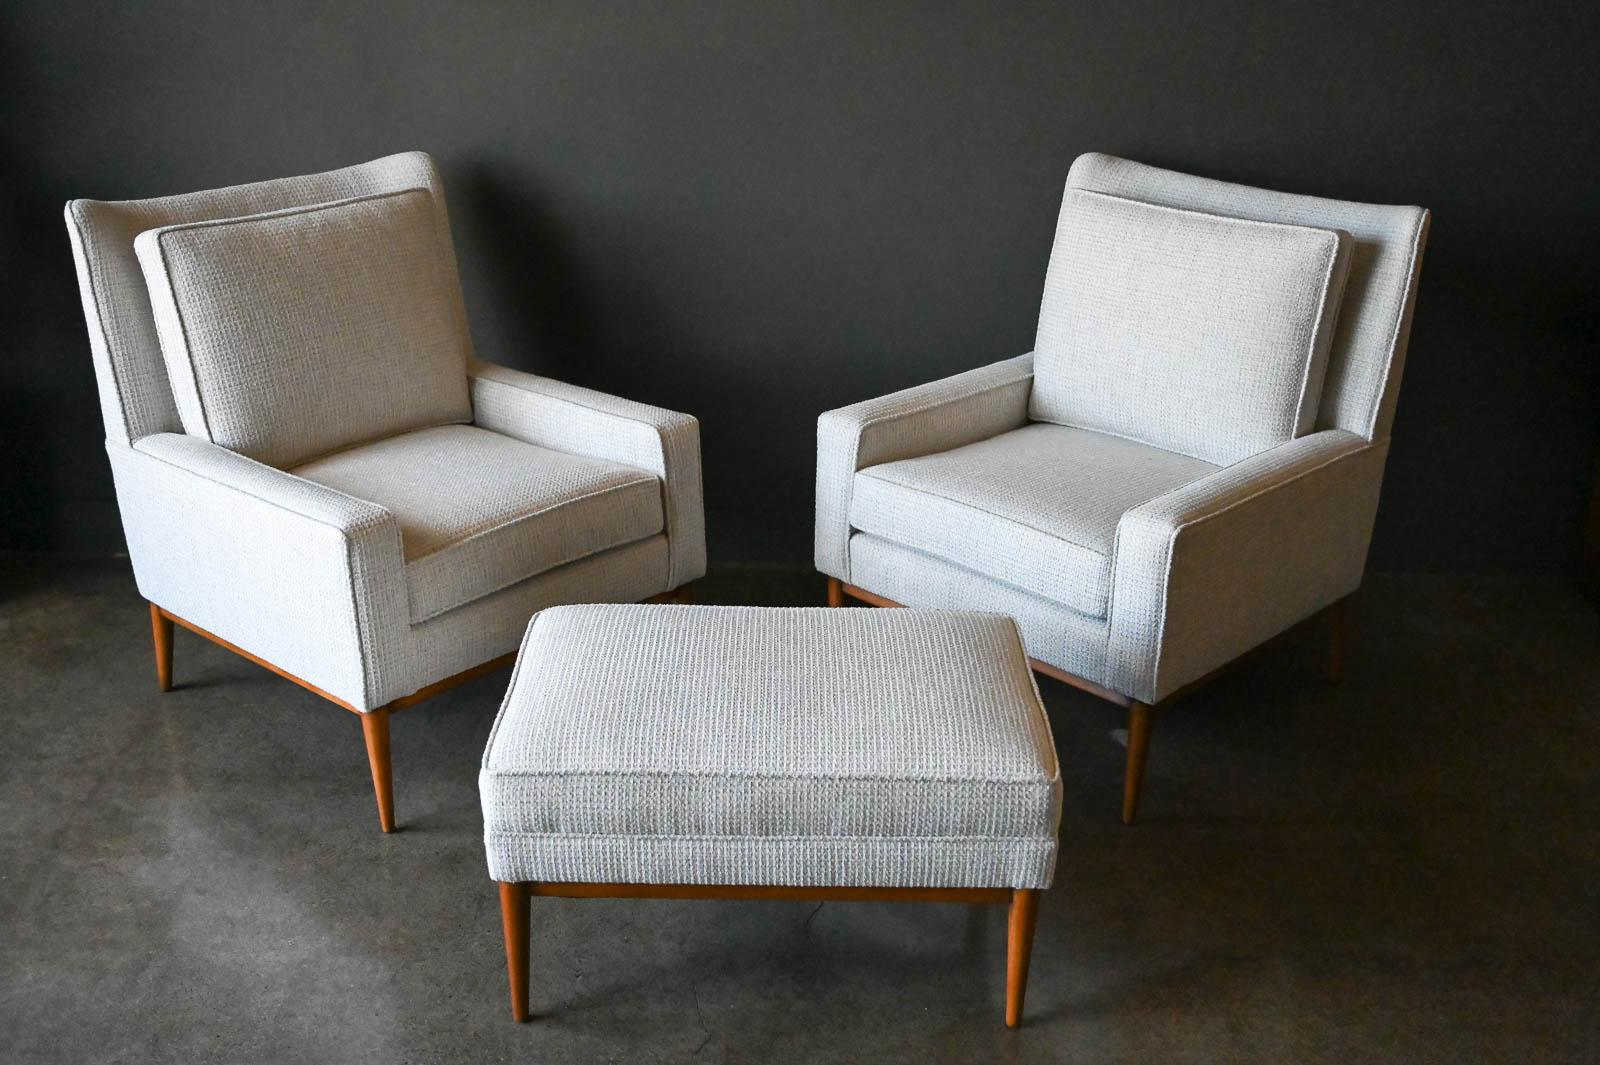 Pair of Paul McCobb Model 302 lounge chairs with ottoman, circa 1955. Professionally restored in excellent condition, these chairs have the matching ottoman redone in beautiful textured neutral tweed with hints of grey and beige. Exceptionally